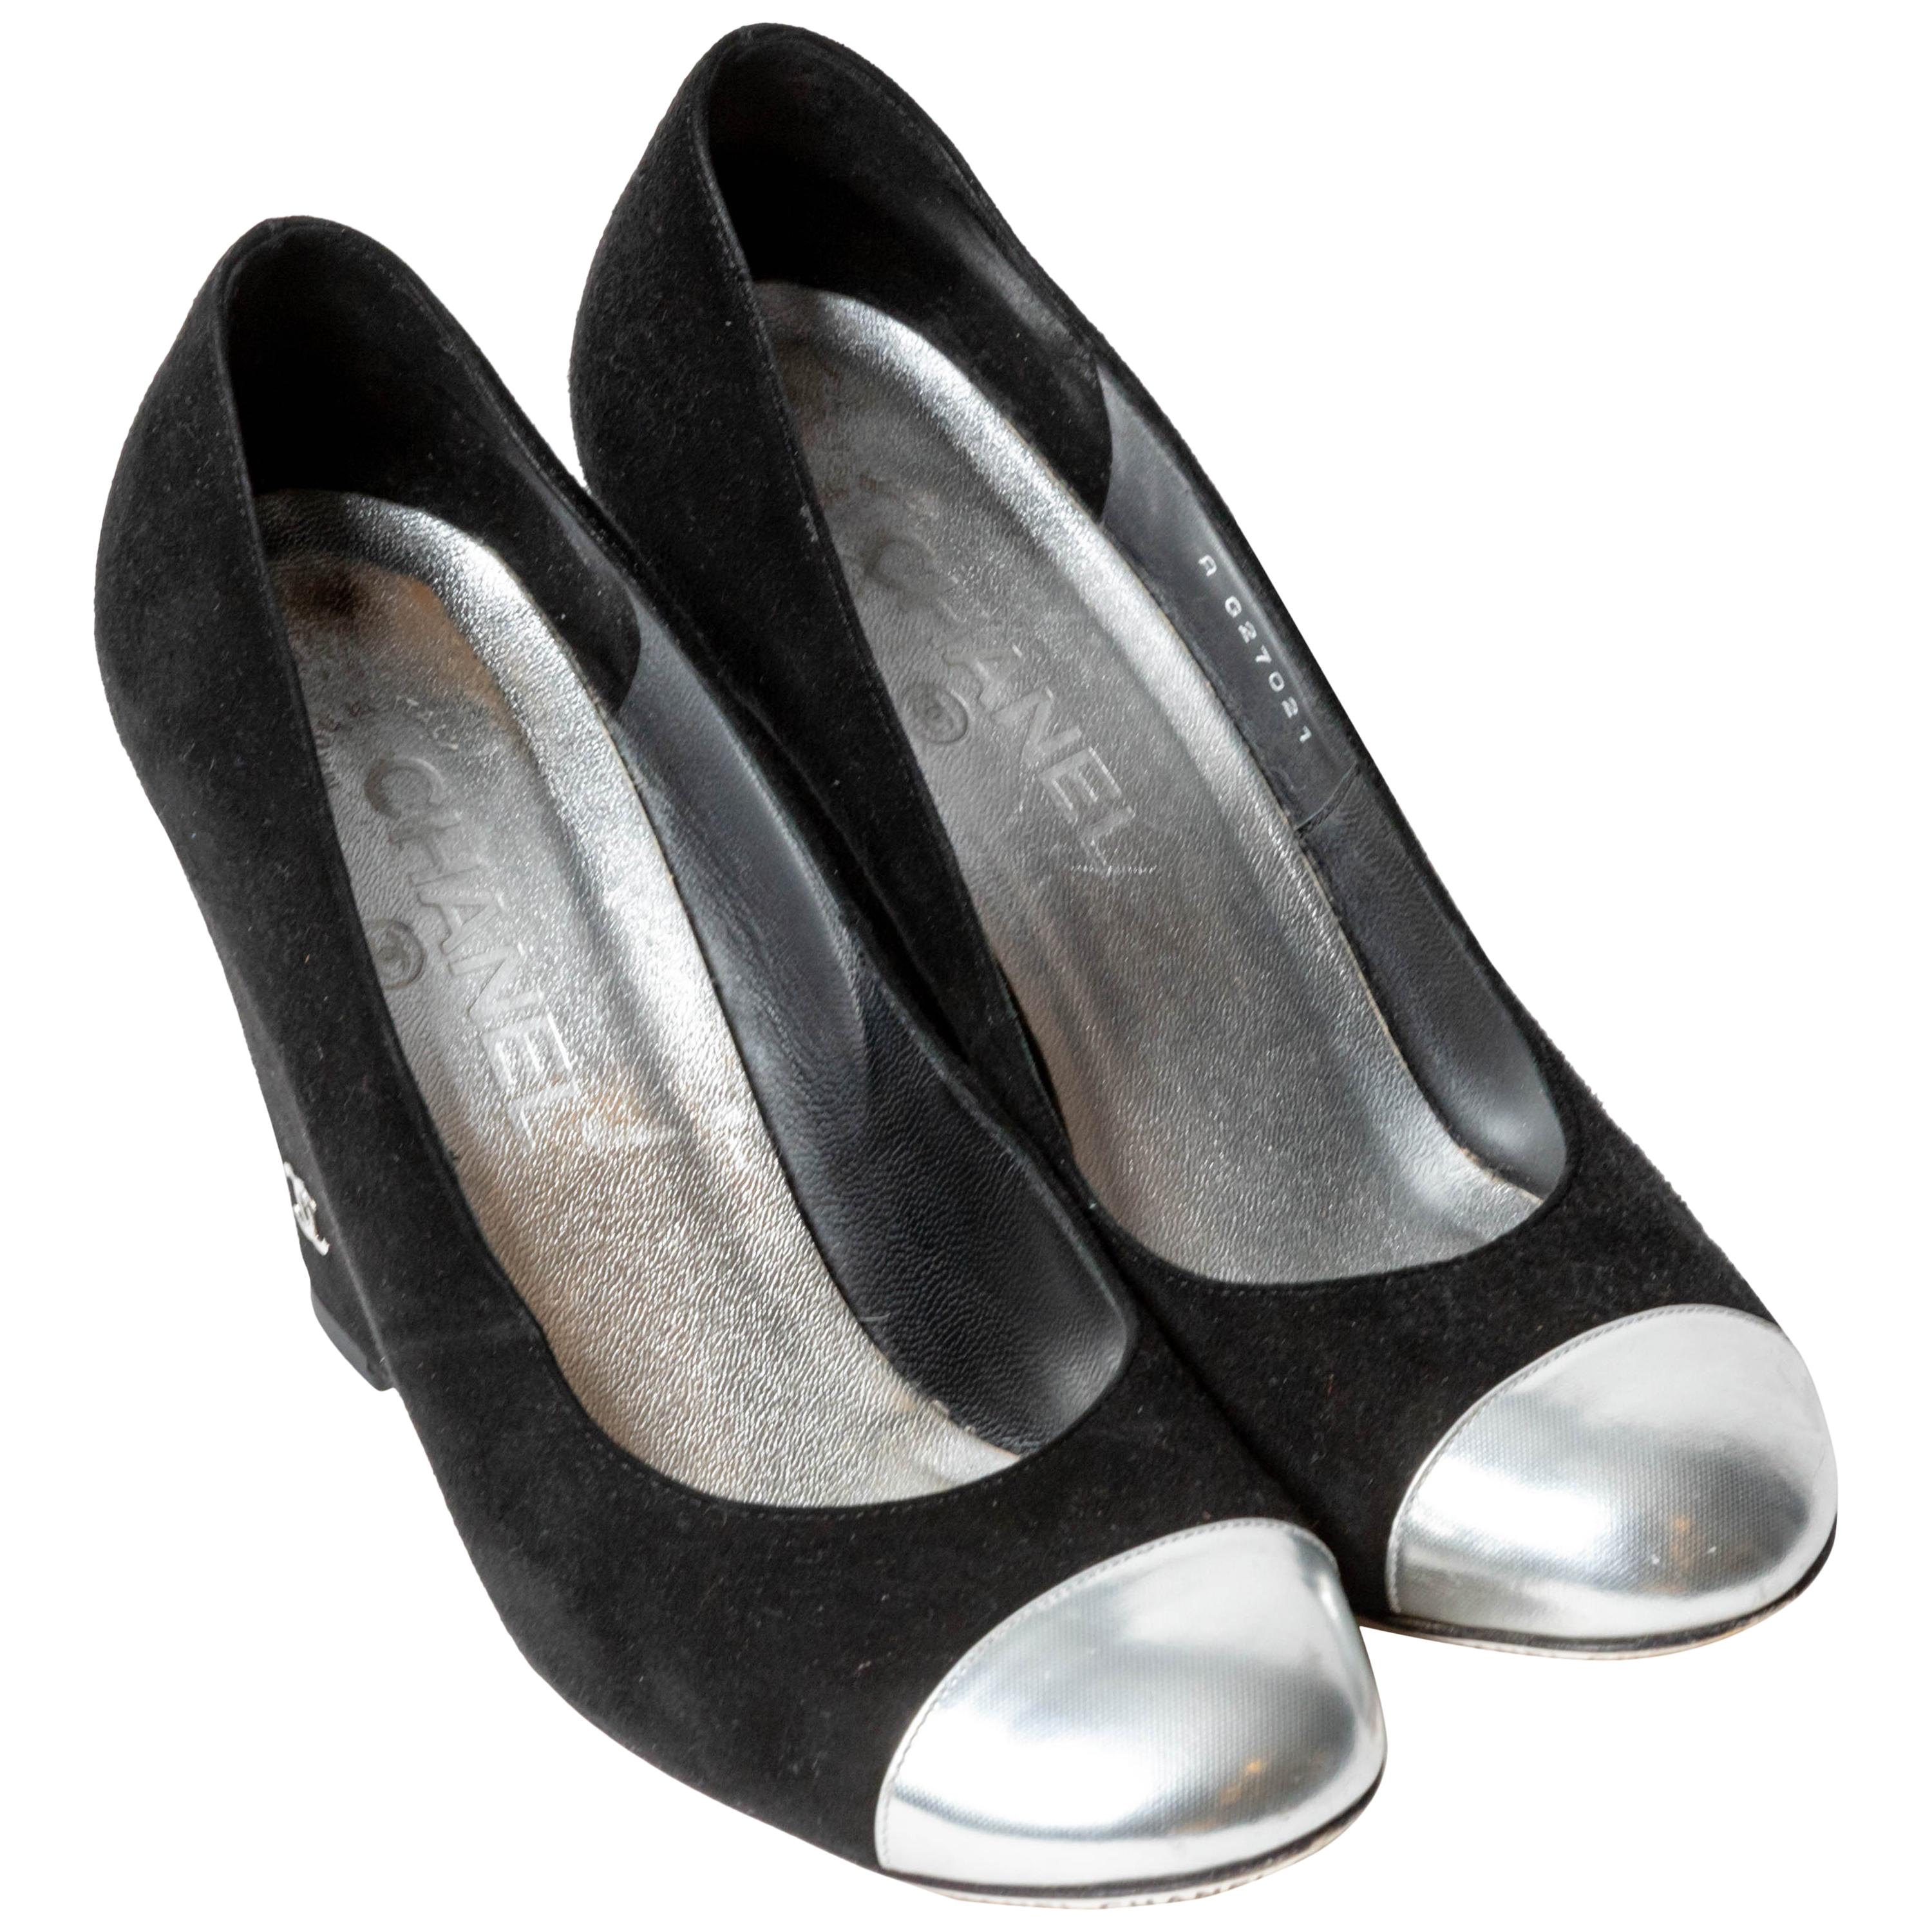 Chanel Silver and Black Suede Wedges - Size 37.5 / 7.5